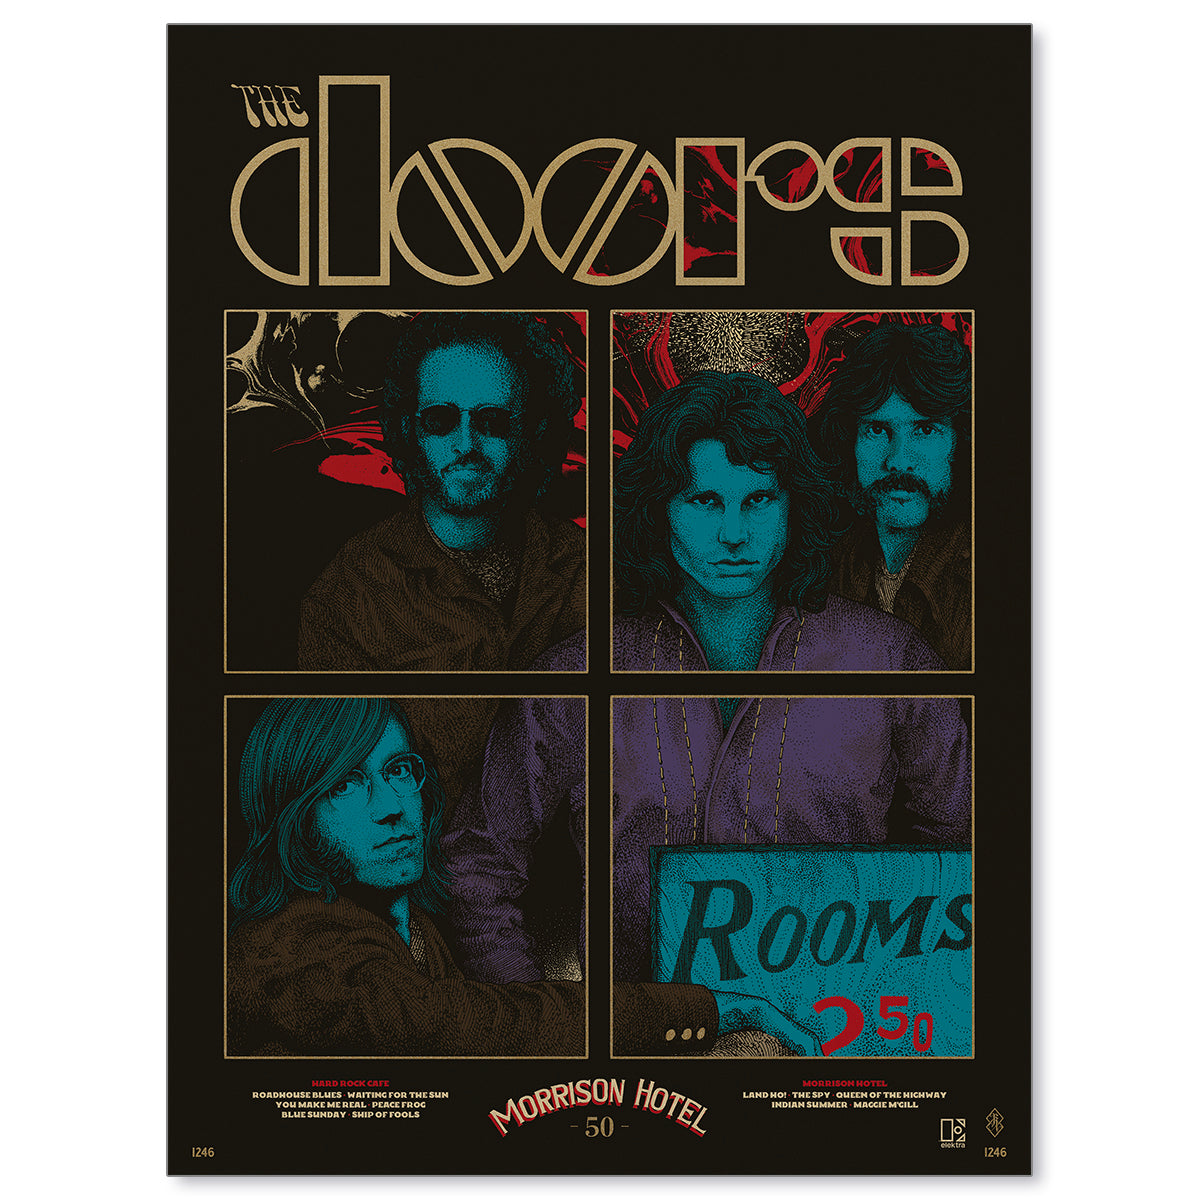 The Doors Morrison Hotel Print by Richey Beckett (Roadhouse Blues Edition)